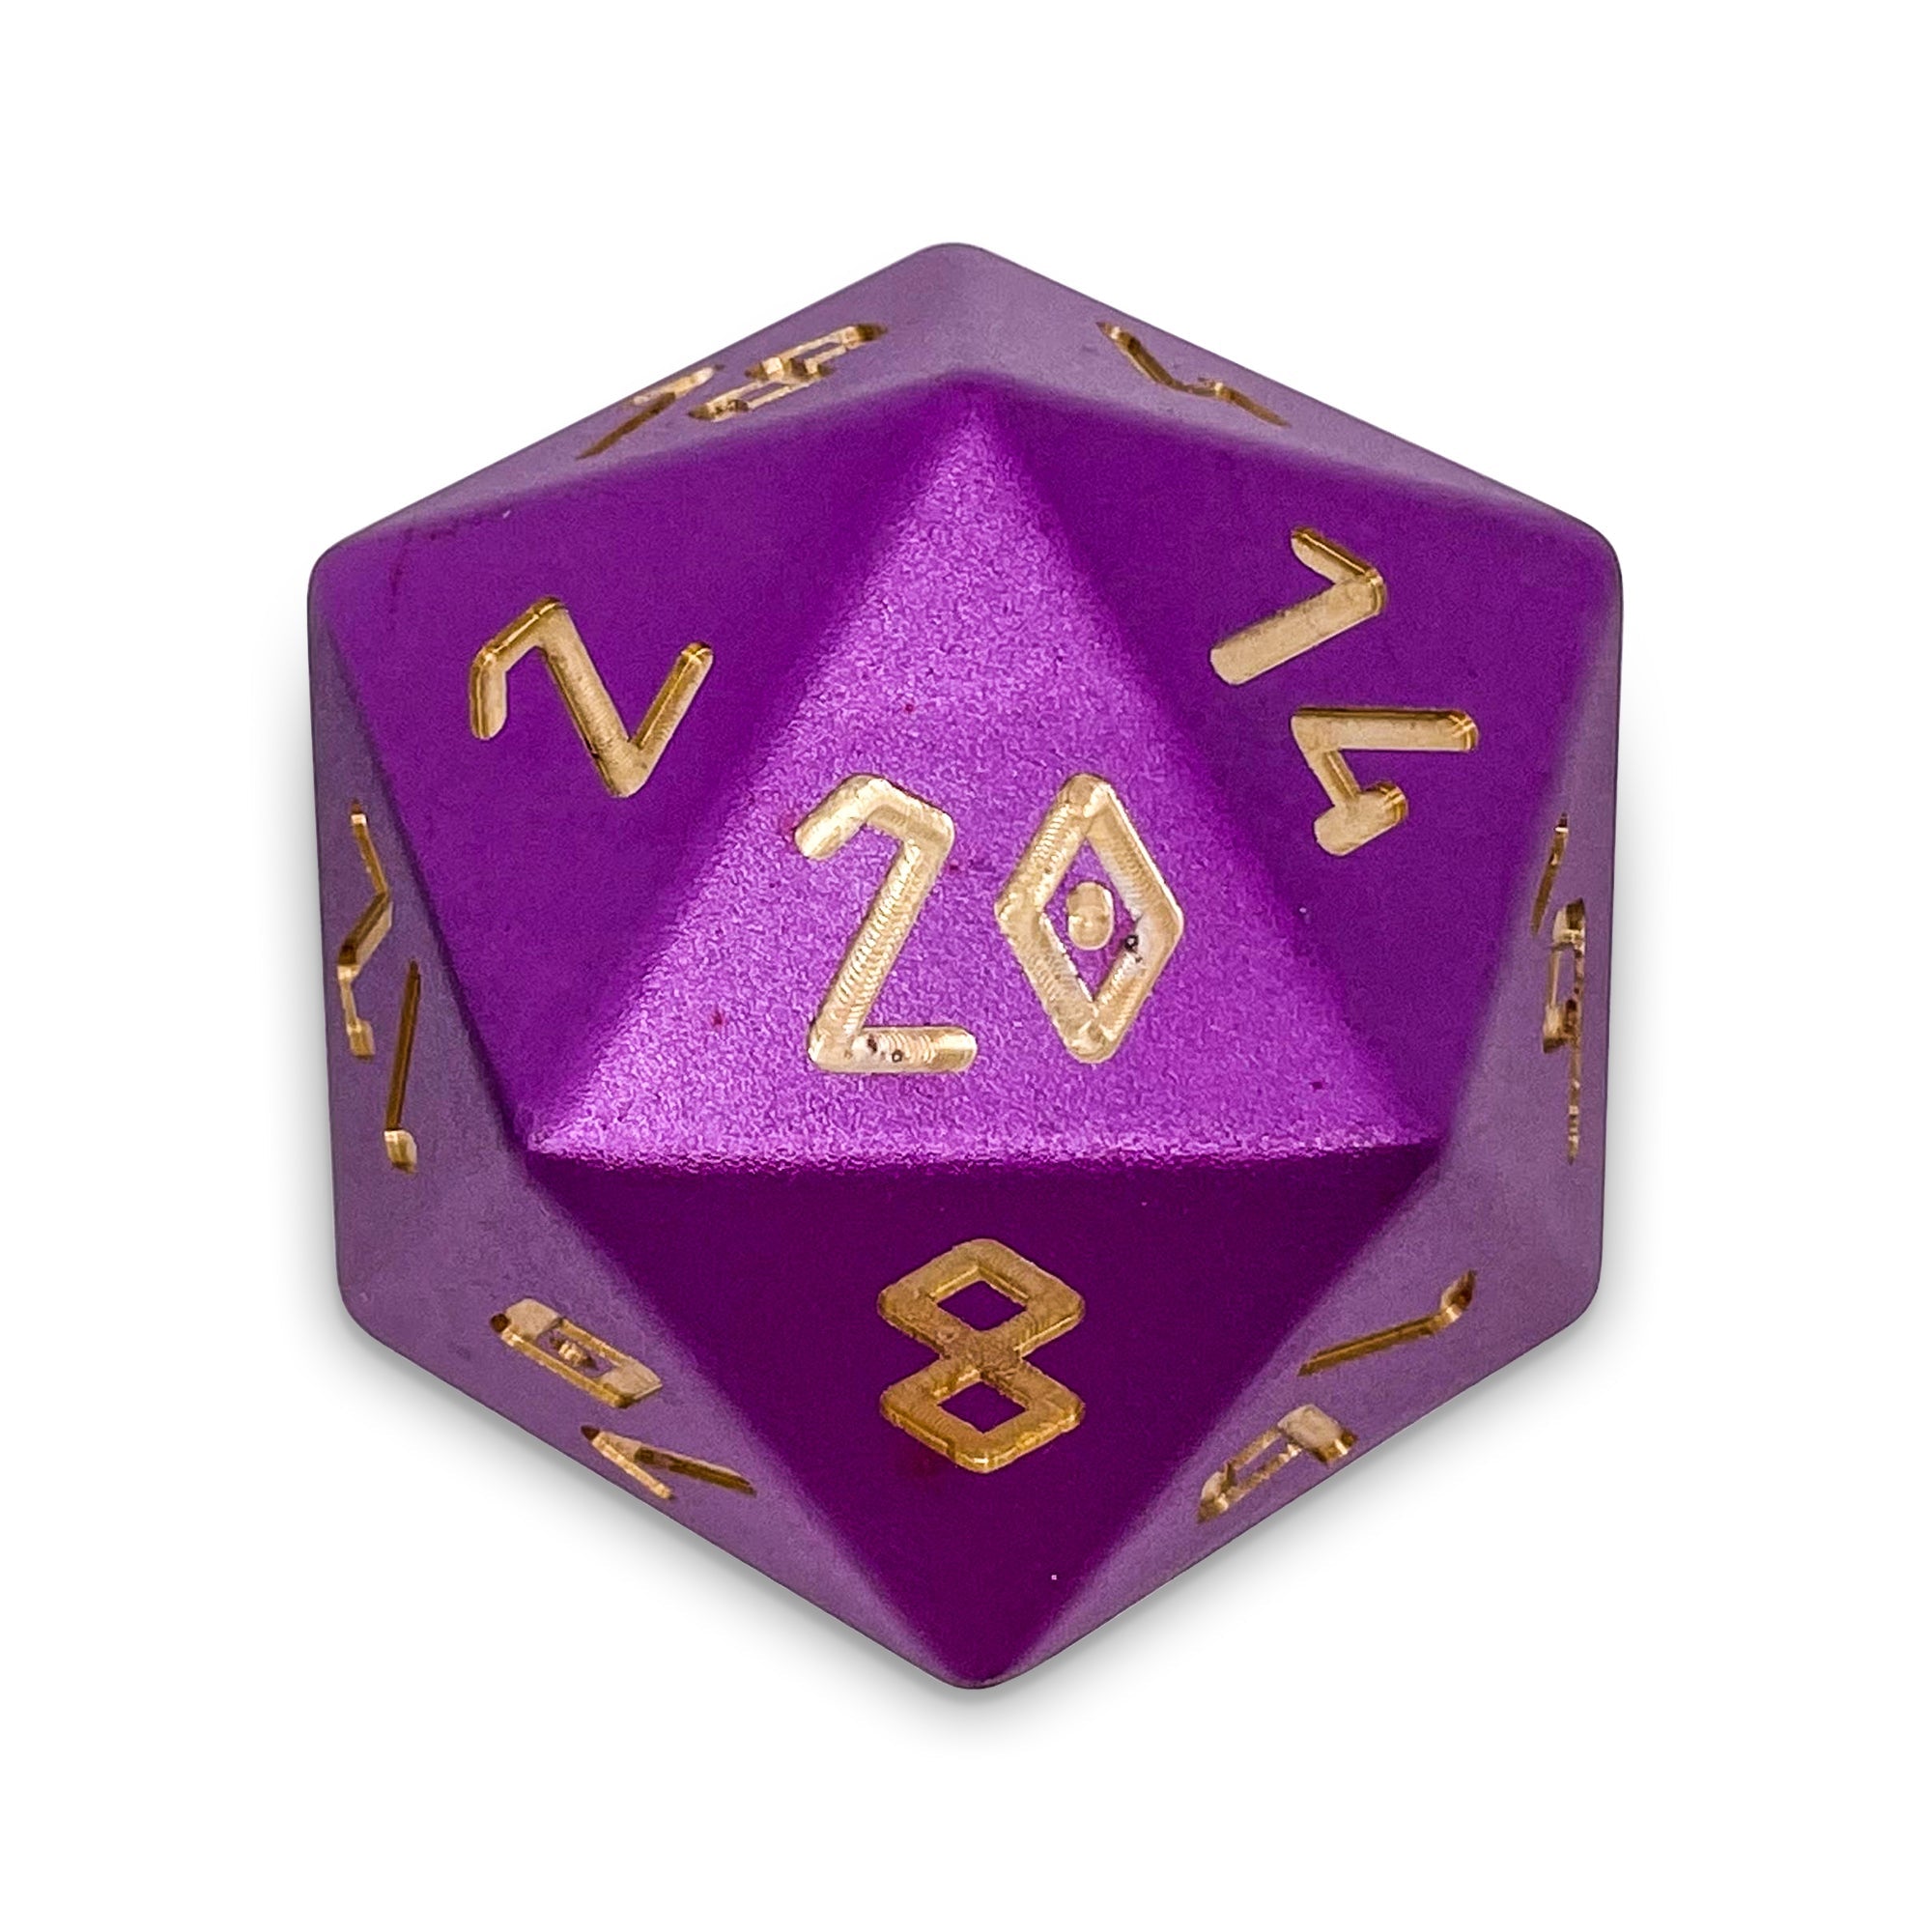 Orb of Bardic Knowledge - Boulder® 55mm 6063 Aluminum Orb Series™ Dice - NOR 02318